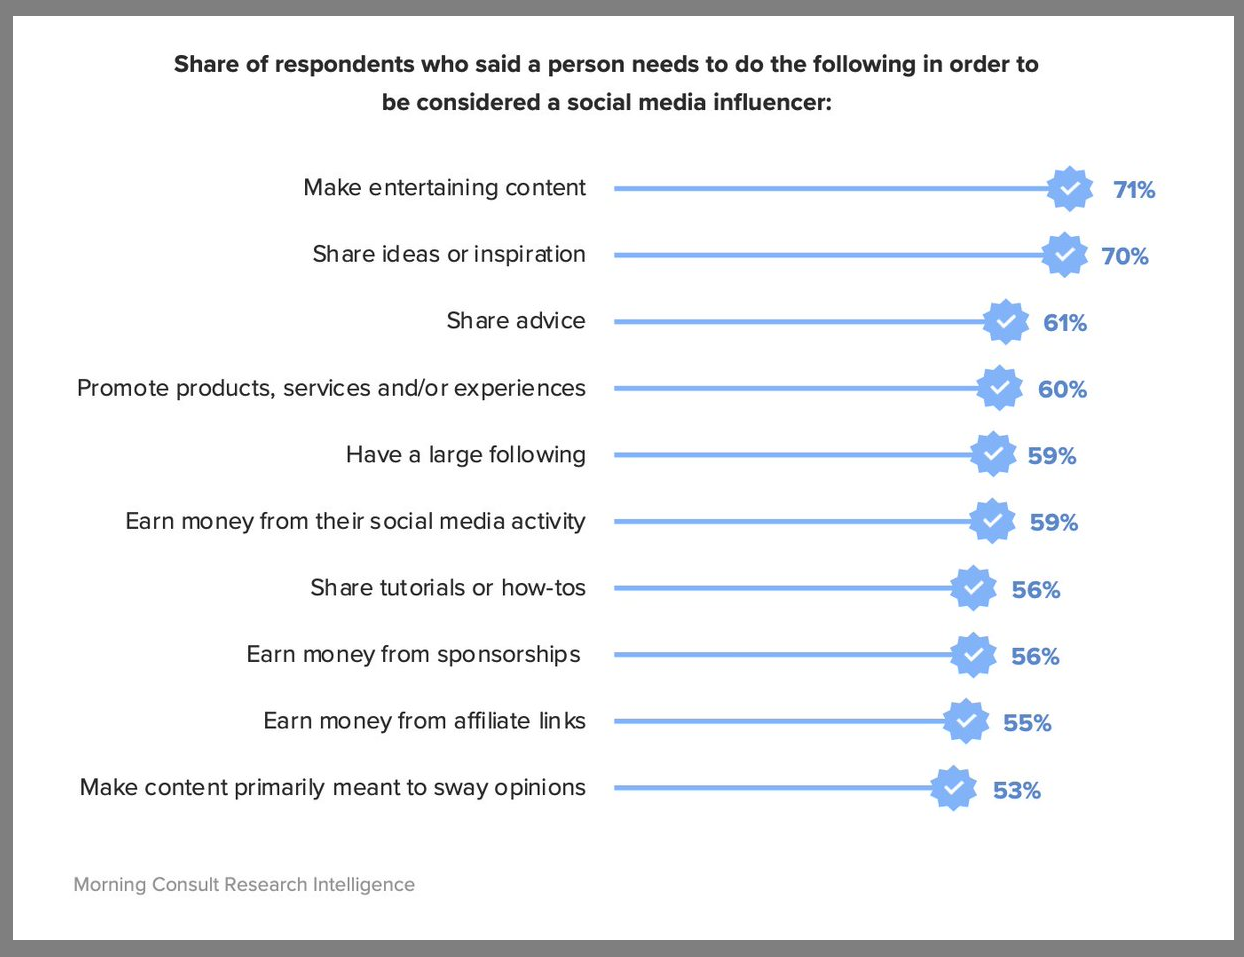 The shares who say a person needs to do the following in order to be considered an influencer: Make entertaining content: 70%, Share ideas or inspiration: 70%, Share advice: 61%, Promote products, services and/or experiences: 60%, Have a large following: 59%